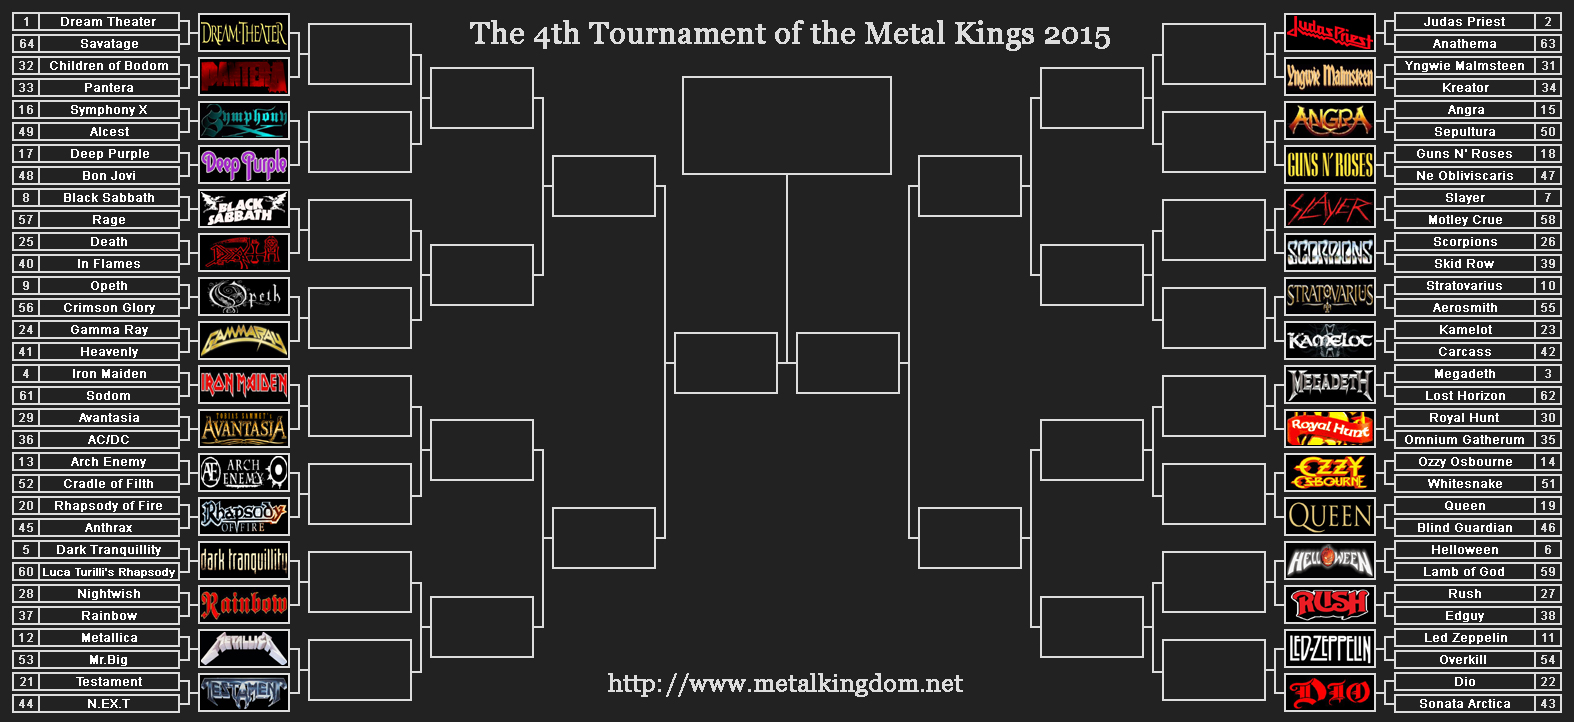 Tournament of the Metal Kings 2015 - Round of 32